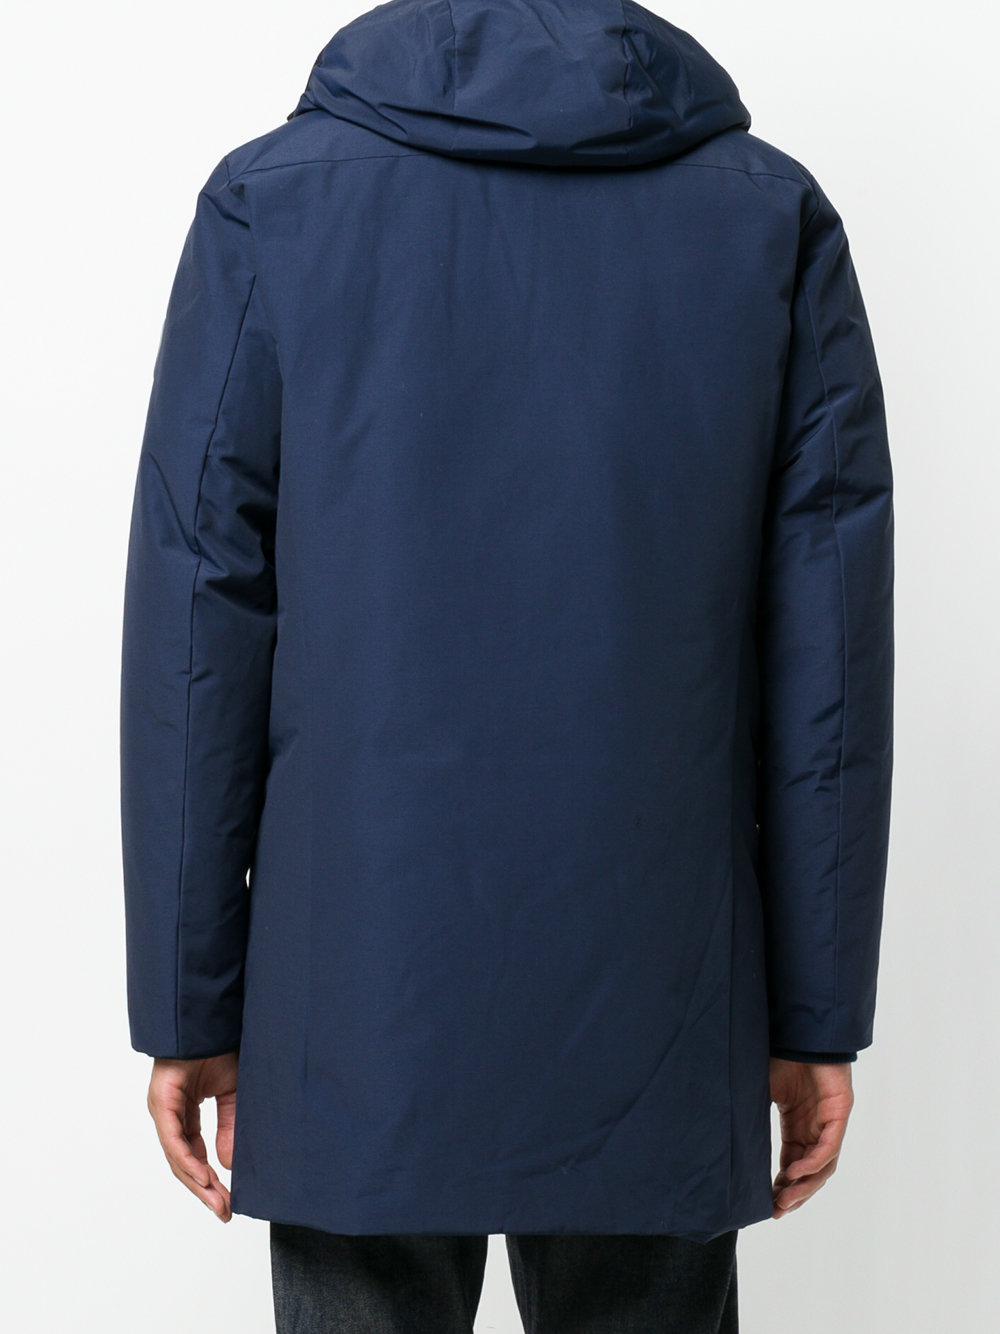 Save The Duck Cotton Copy Padded Parka in Blue for Men - Lyst